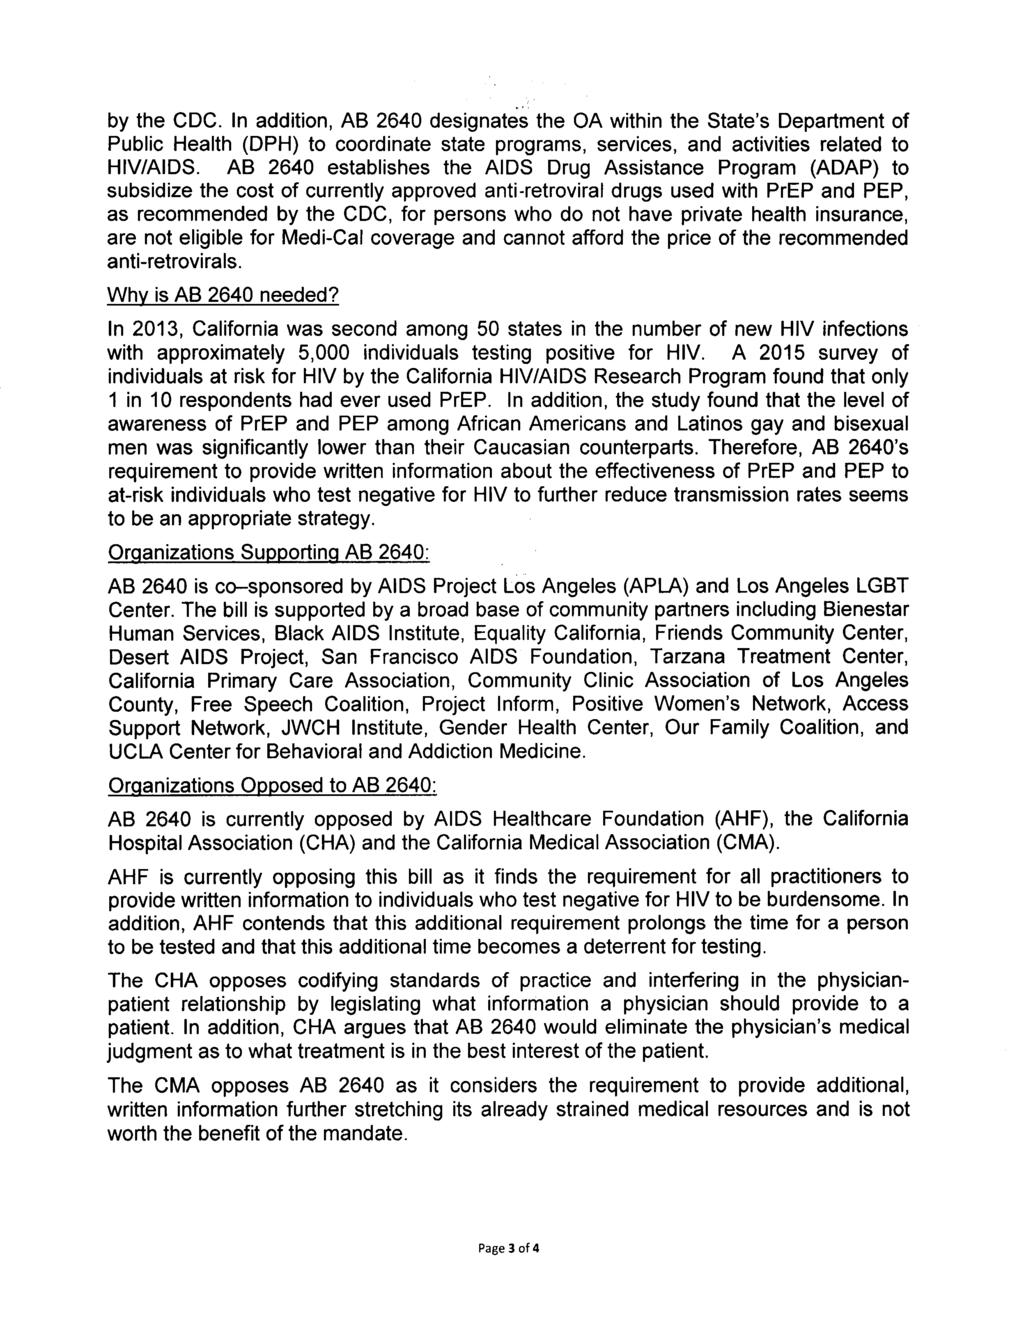 by the CDC. In addition, AB 2640 designates the OA within the State' s Department of Public Health ( DPH) to coordinate state programs, services, and activities related to HIV/AIDS.